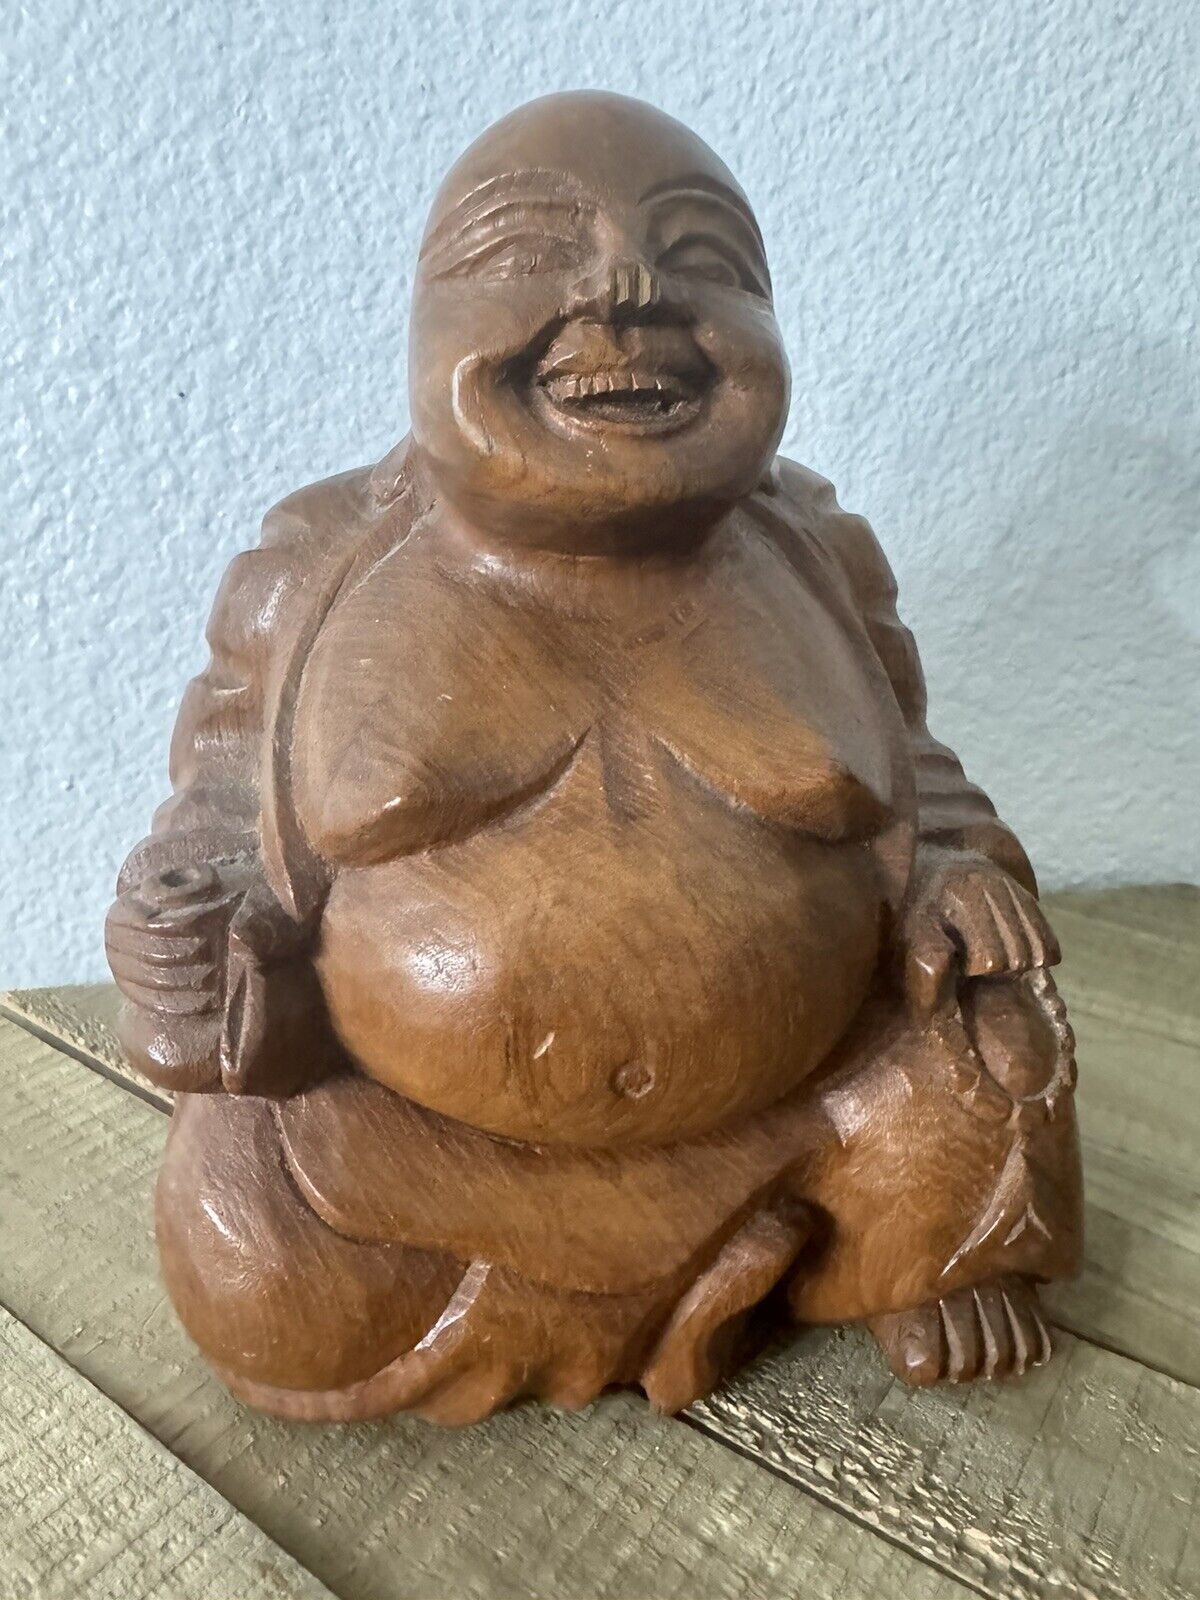 Vintage Asian Wooden Hand Carved Happy Laughing Sitting Buddha Figurine Statue